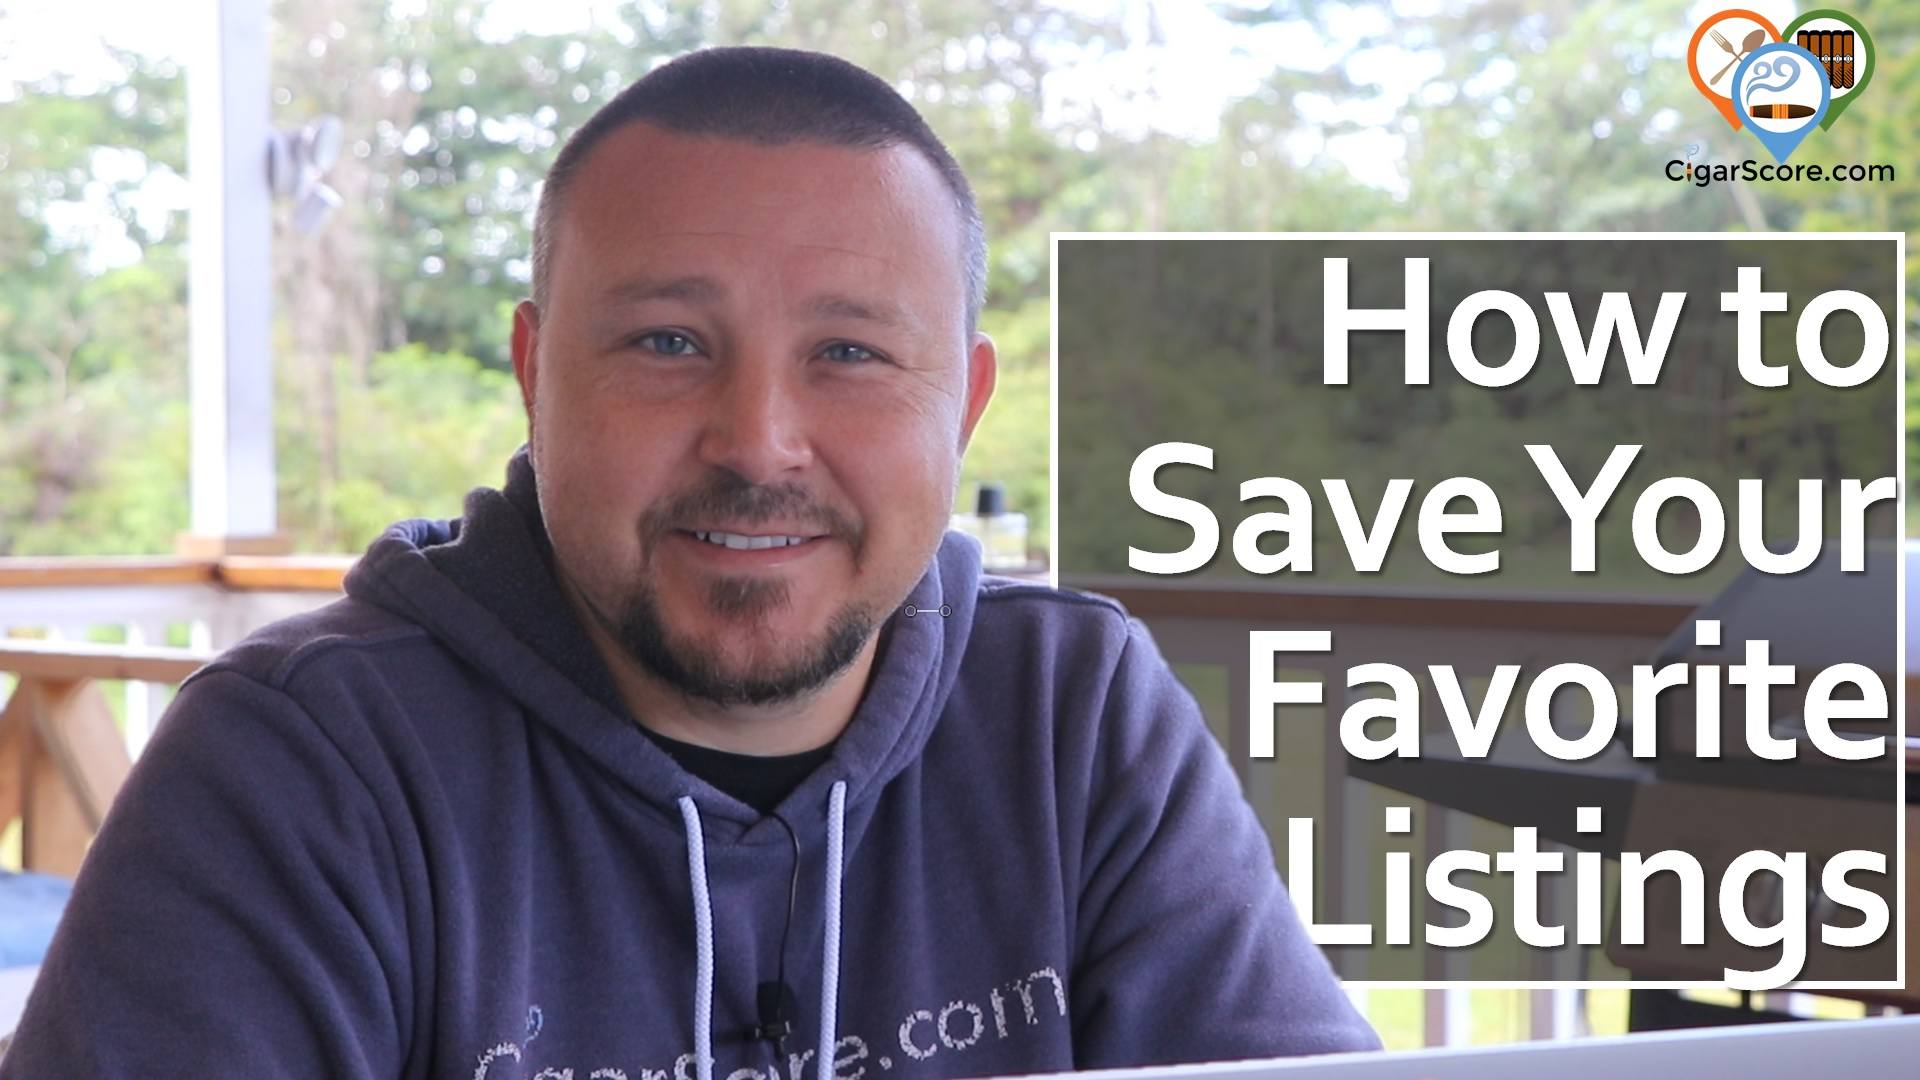 How To Save Your Favorite Listings